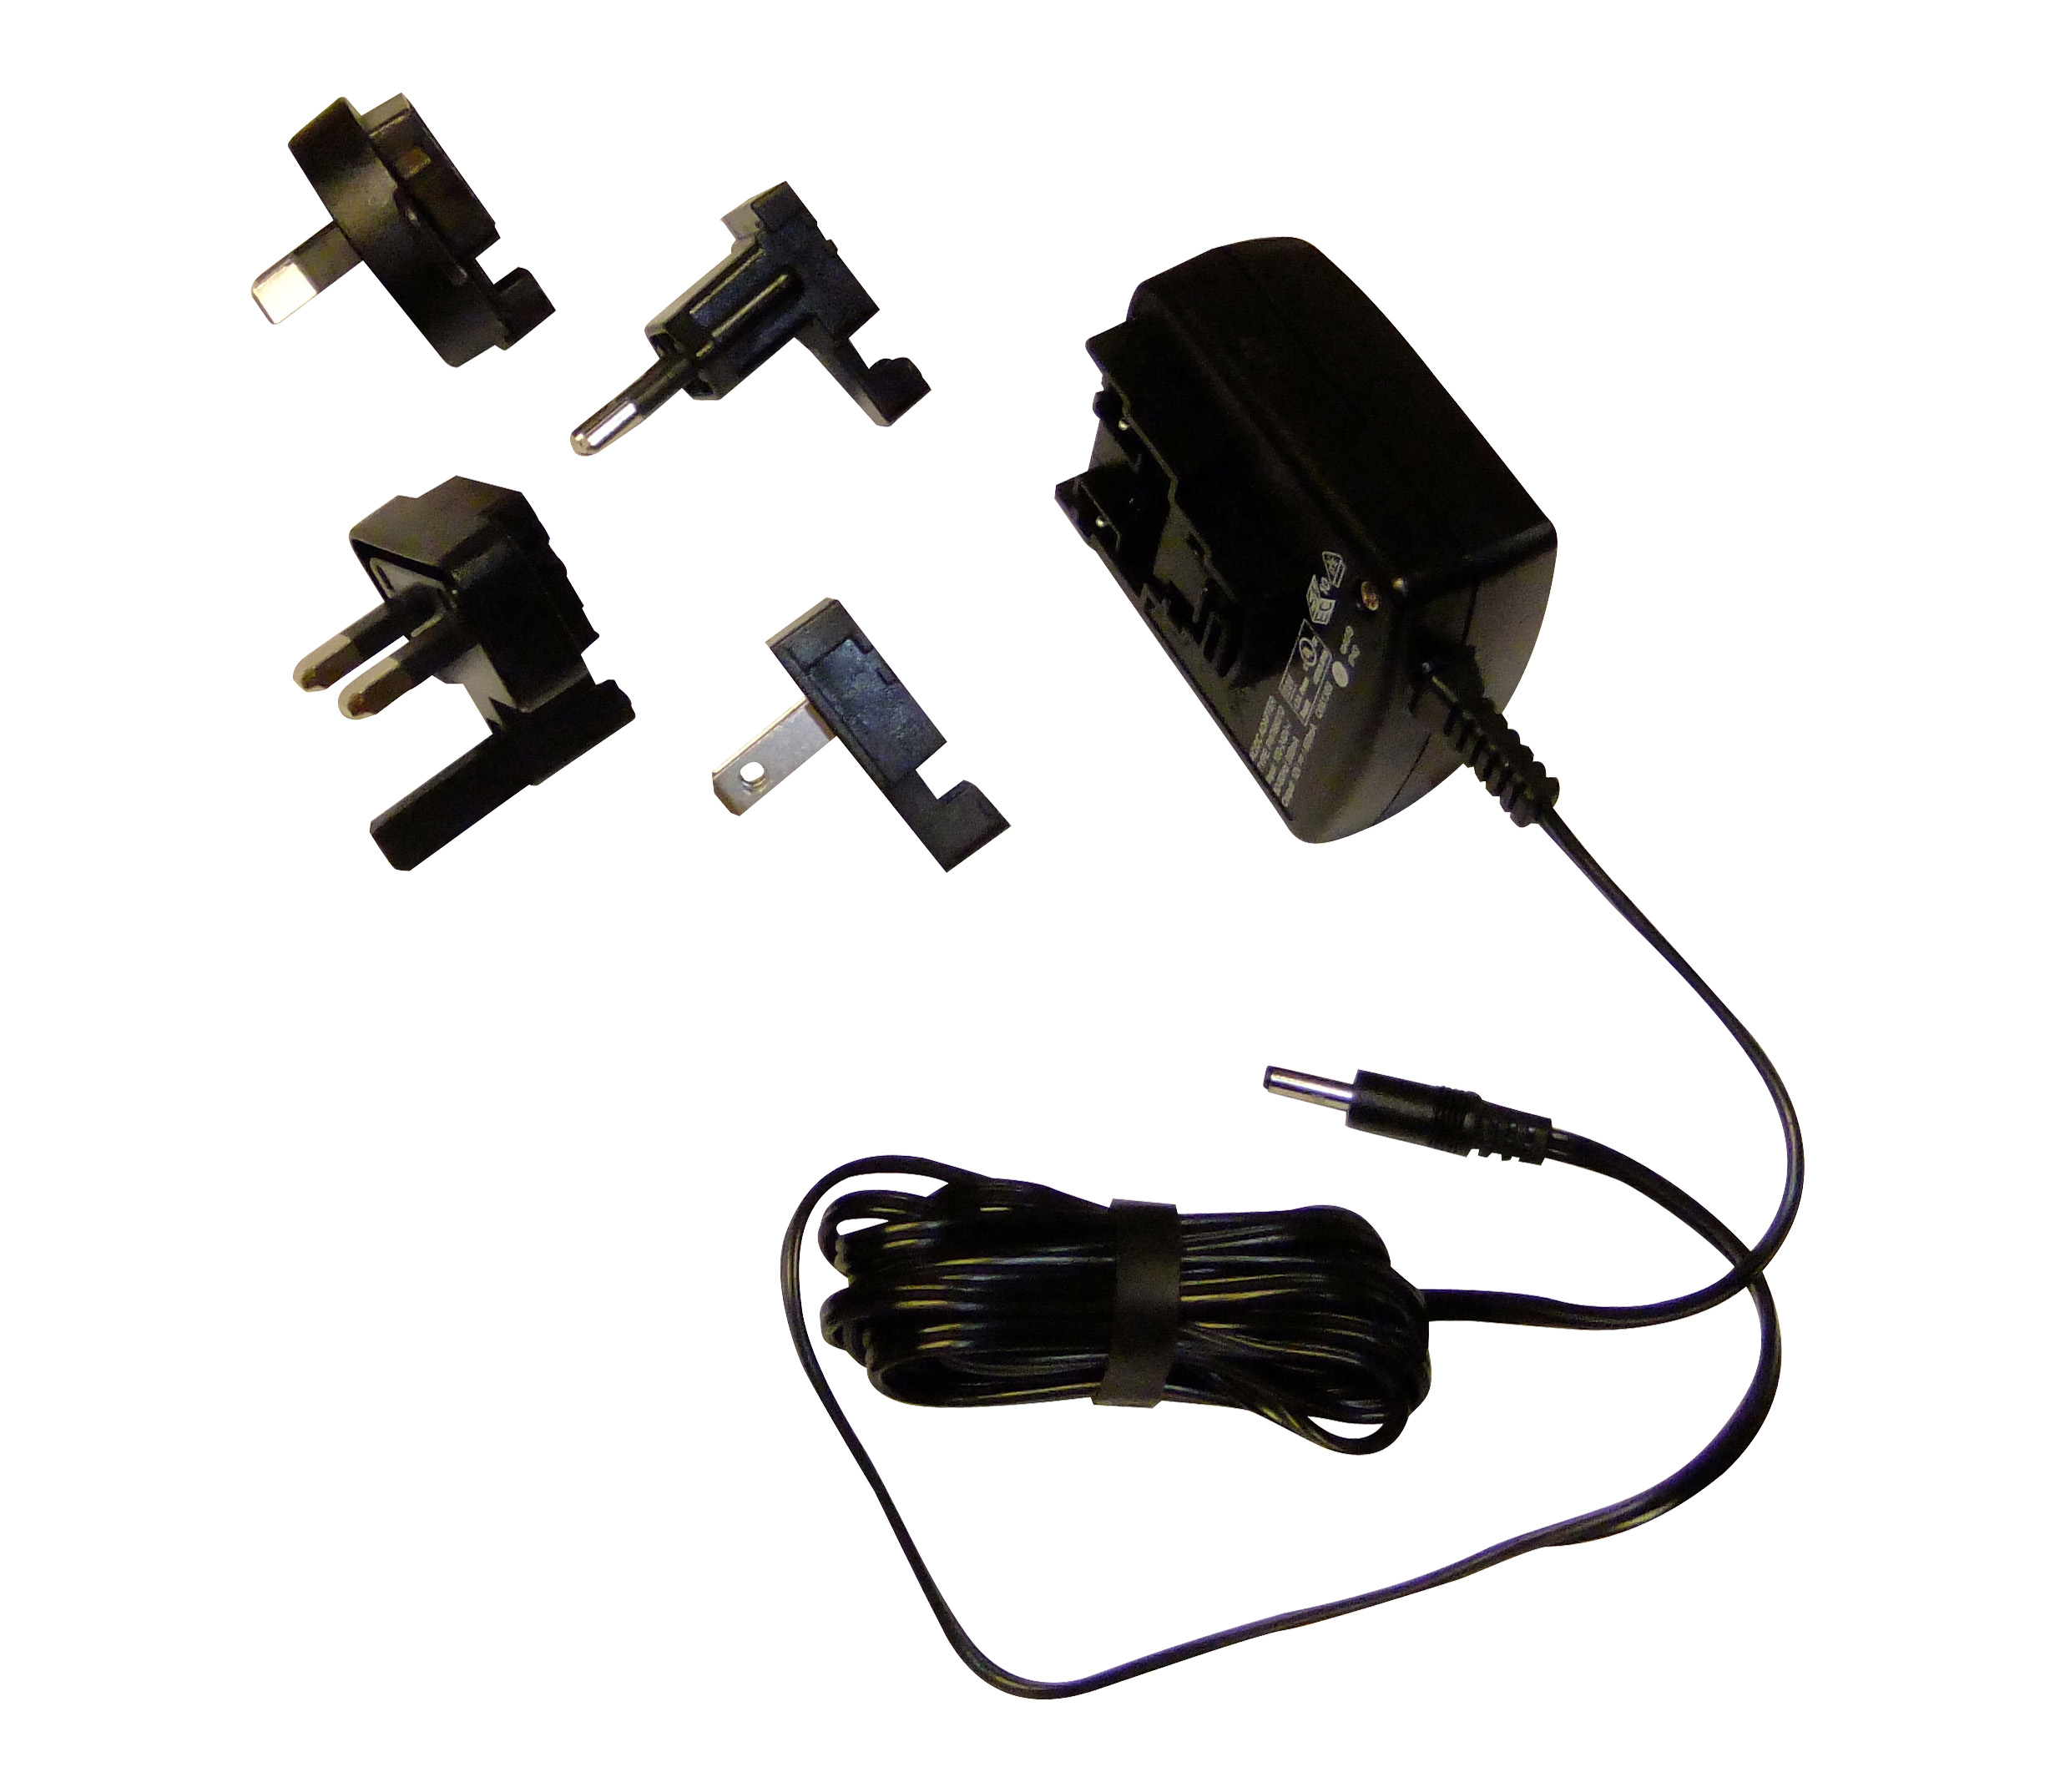 Product image for RaySafe Xi power supply